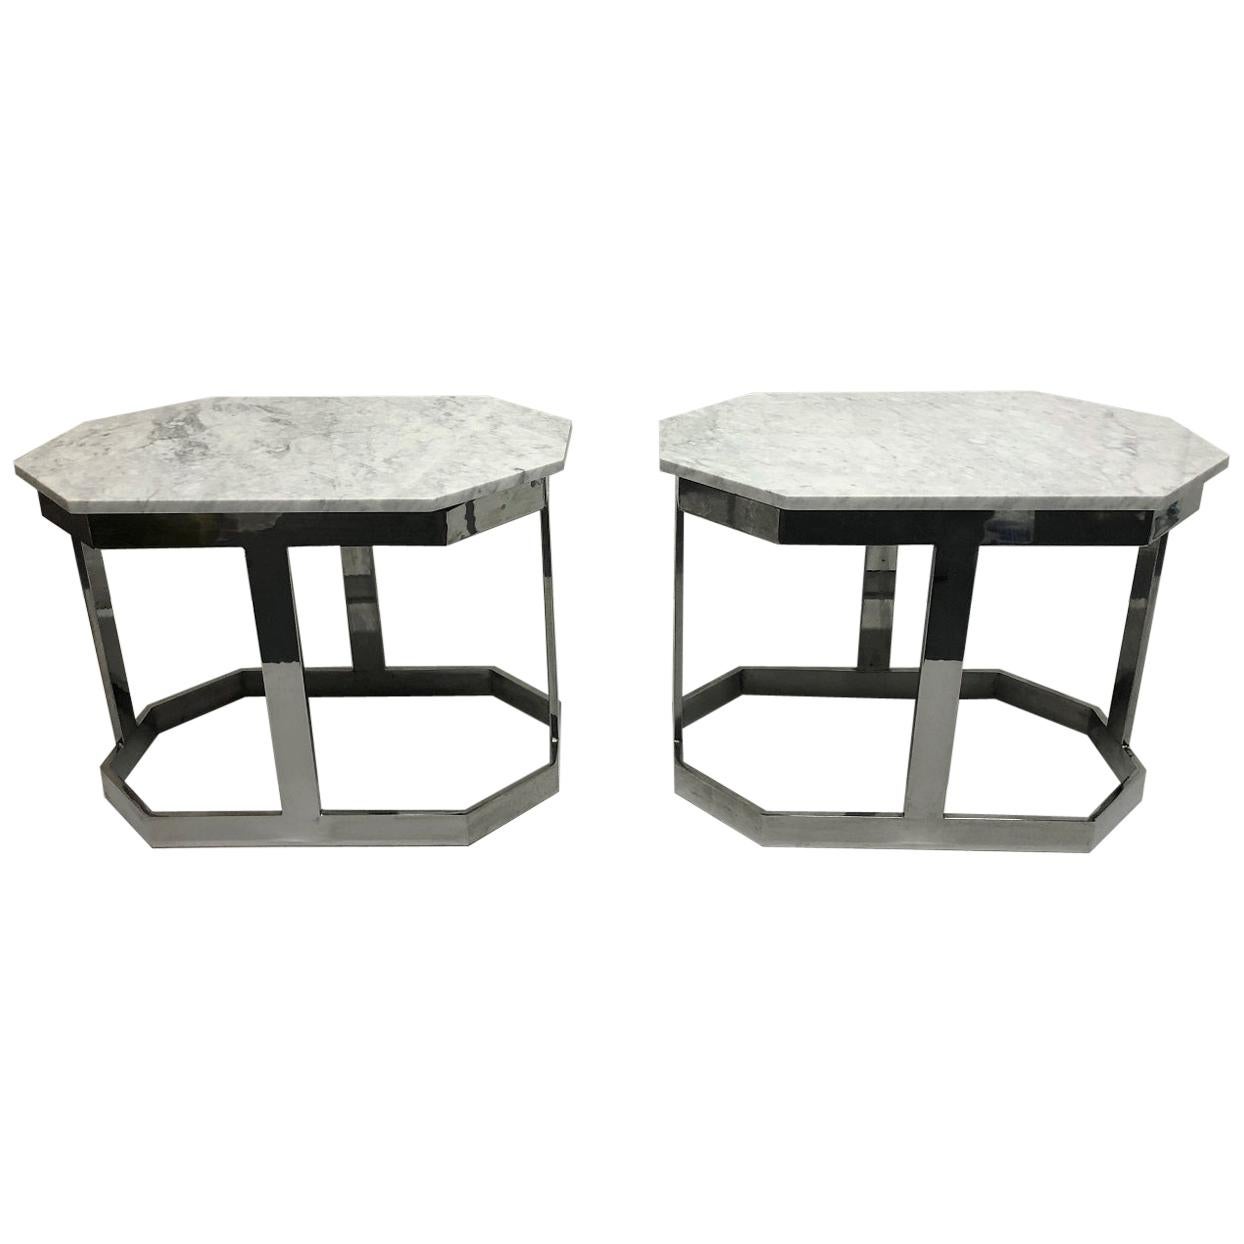 Pair of Chrome and Carrara Marble Octagonal Top Tables For Sale